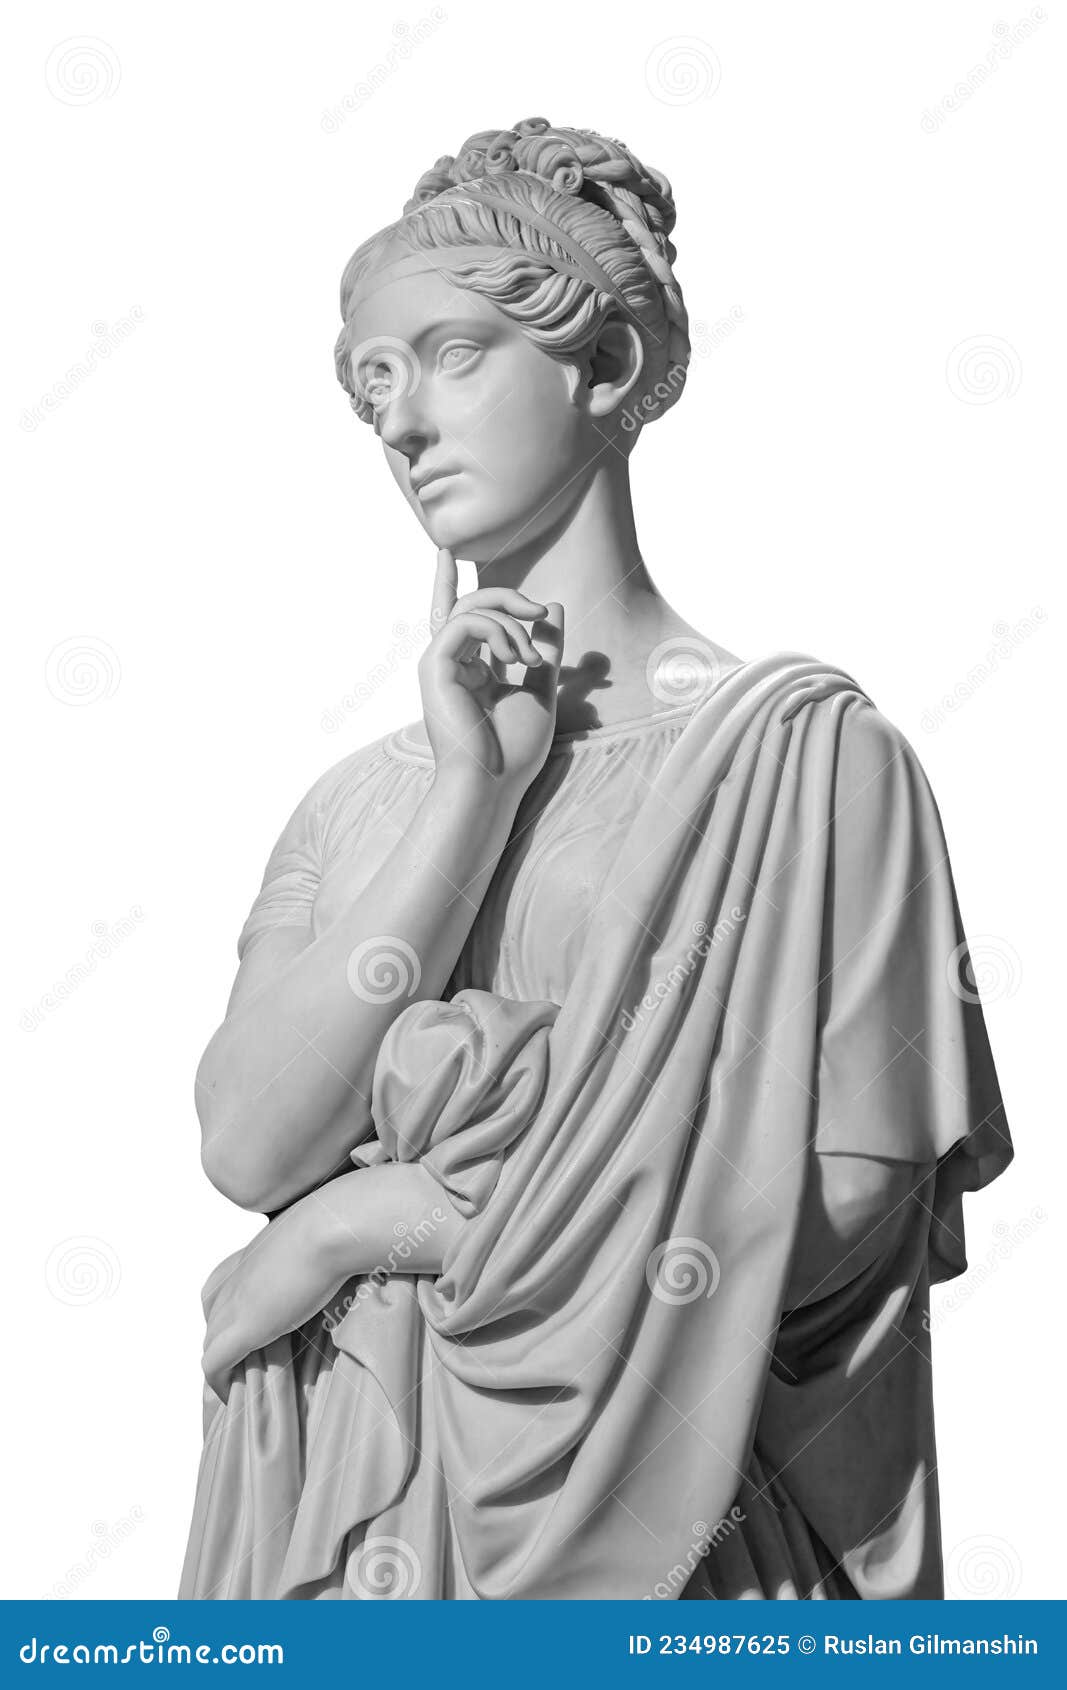 gypsum copy of ancient statue of thinking young lady  on white background. side view of plaster sculpture woman